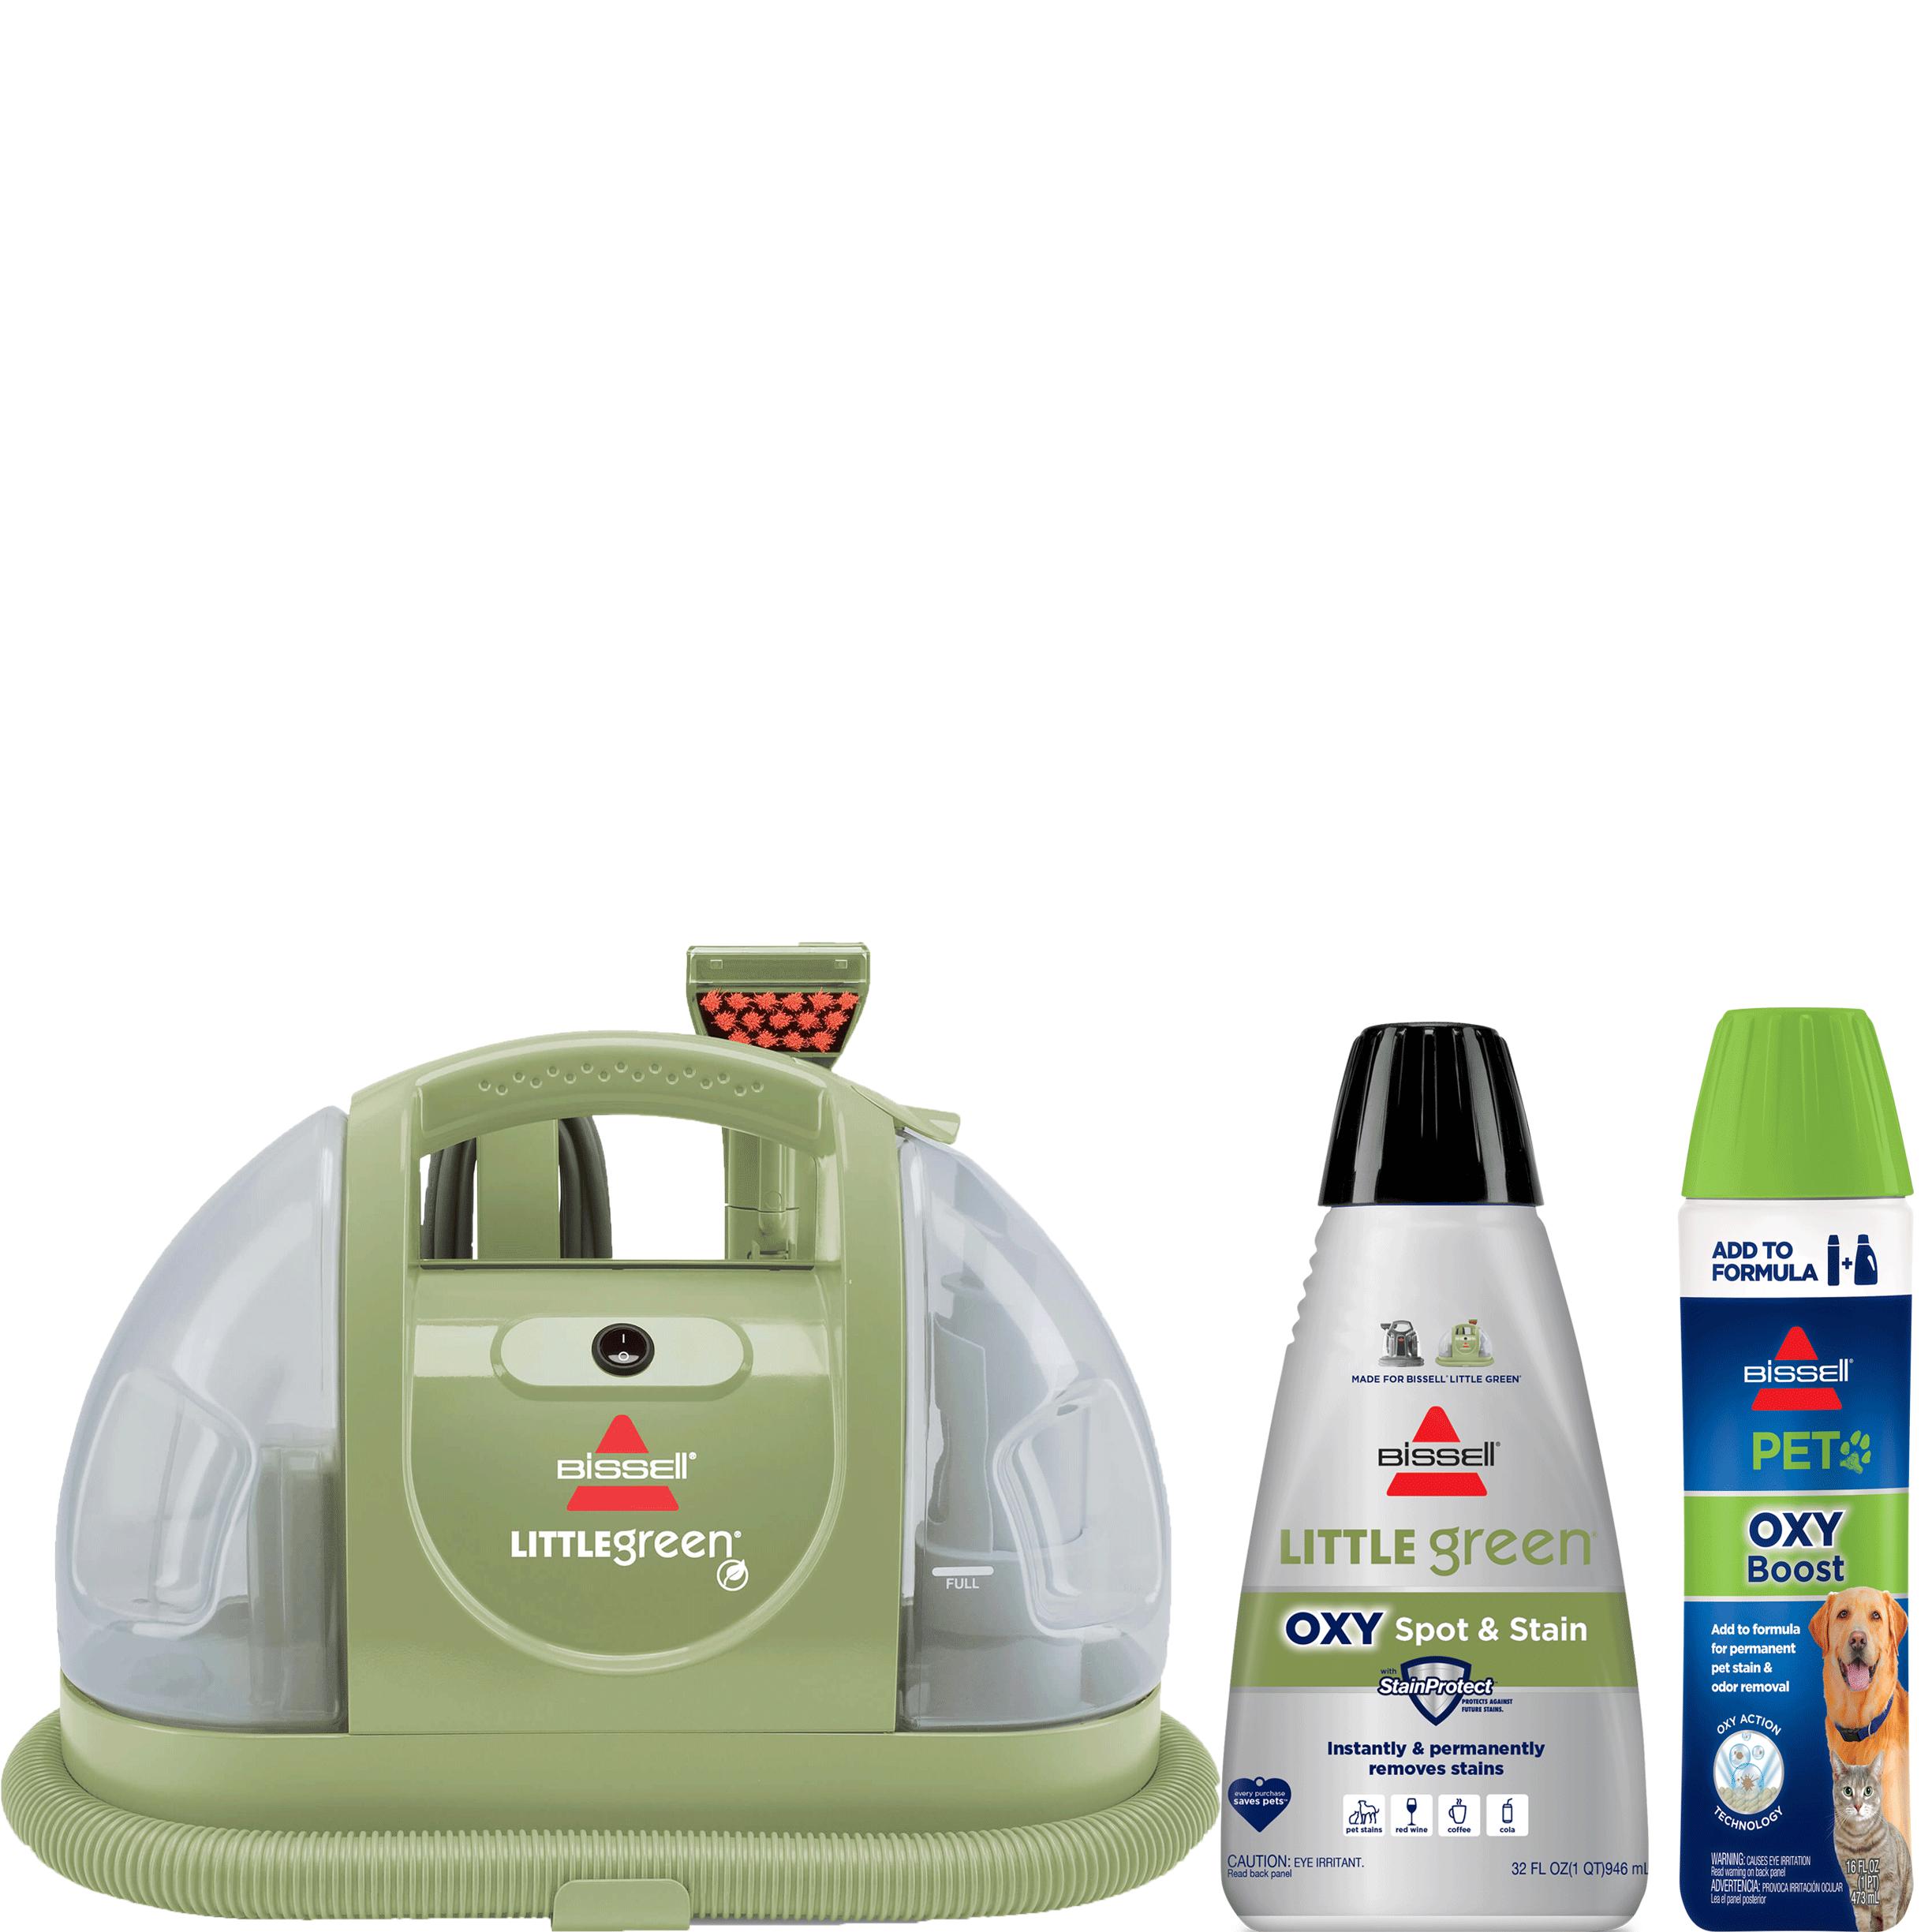 BISSELL Little Green Select